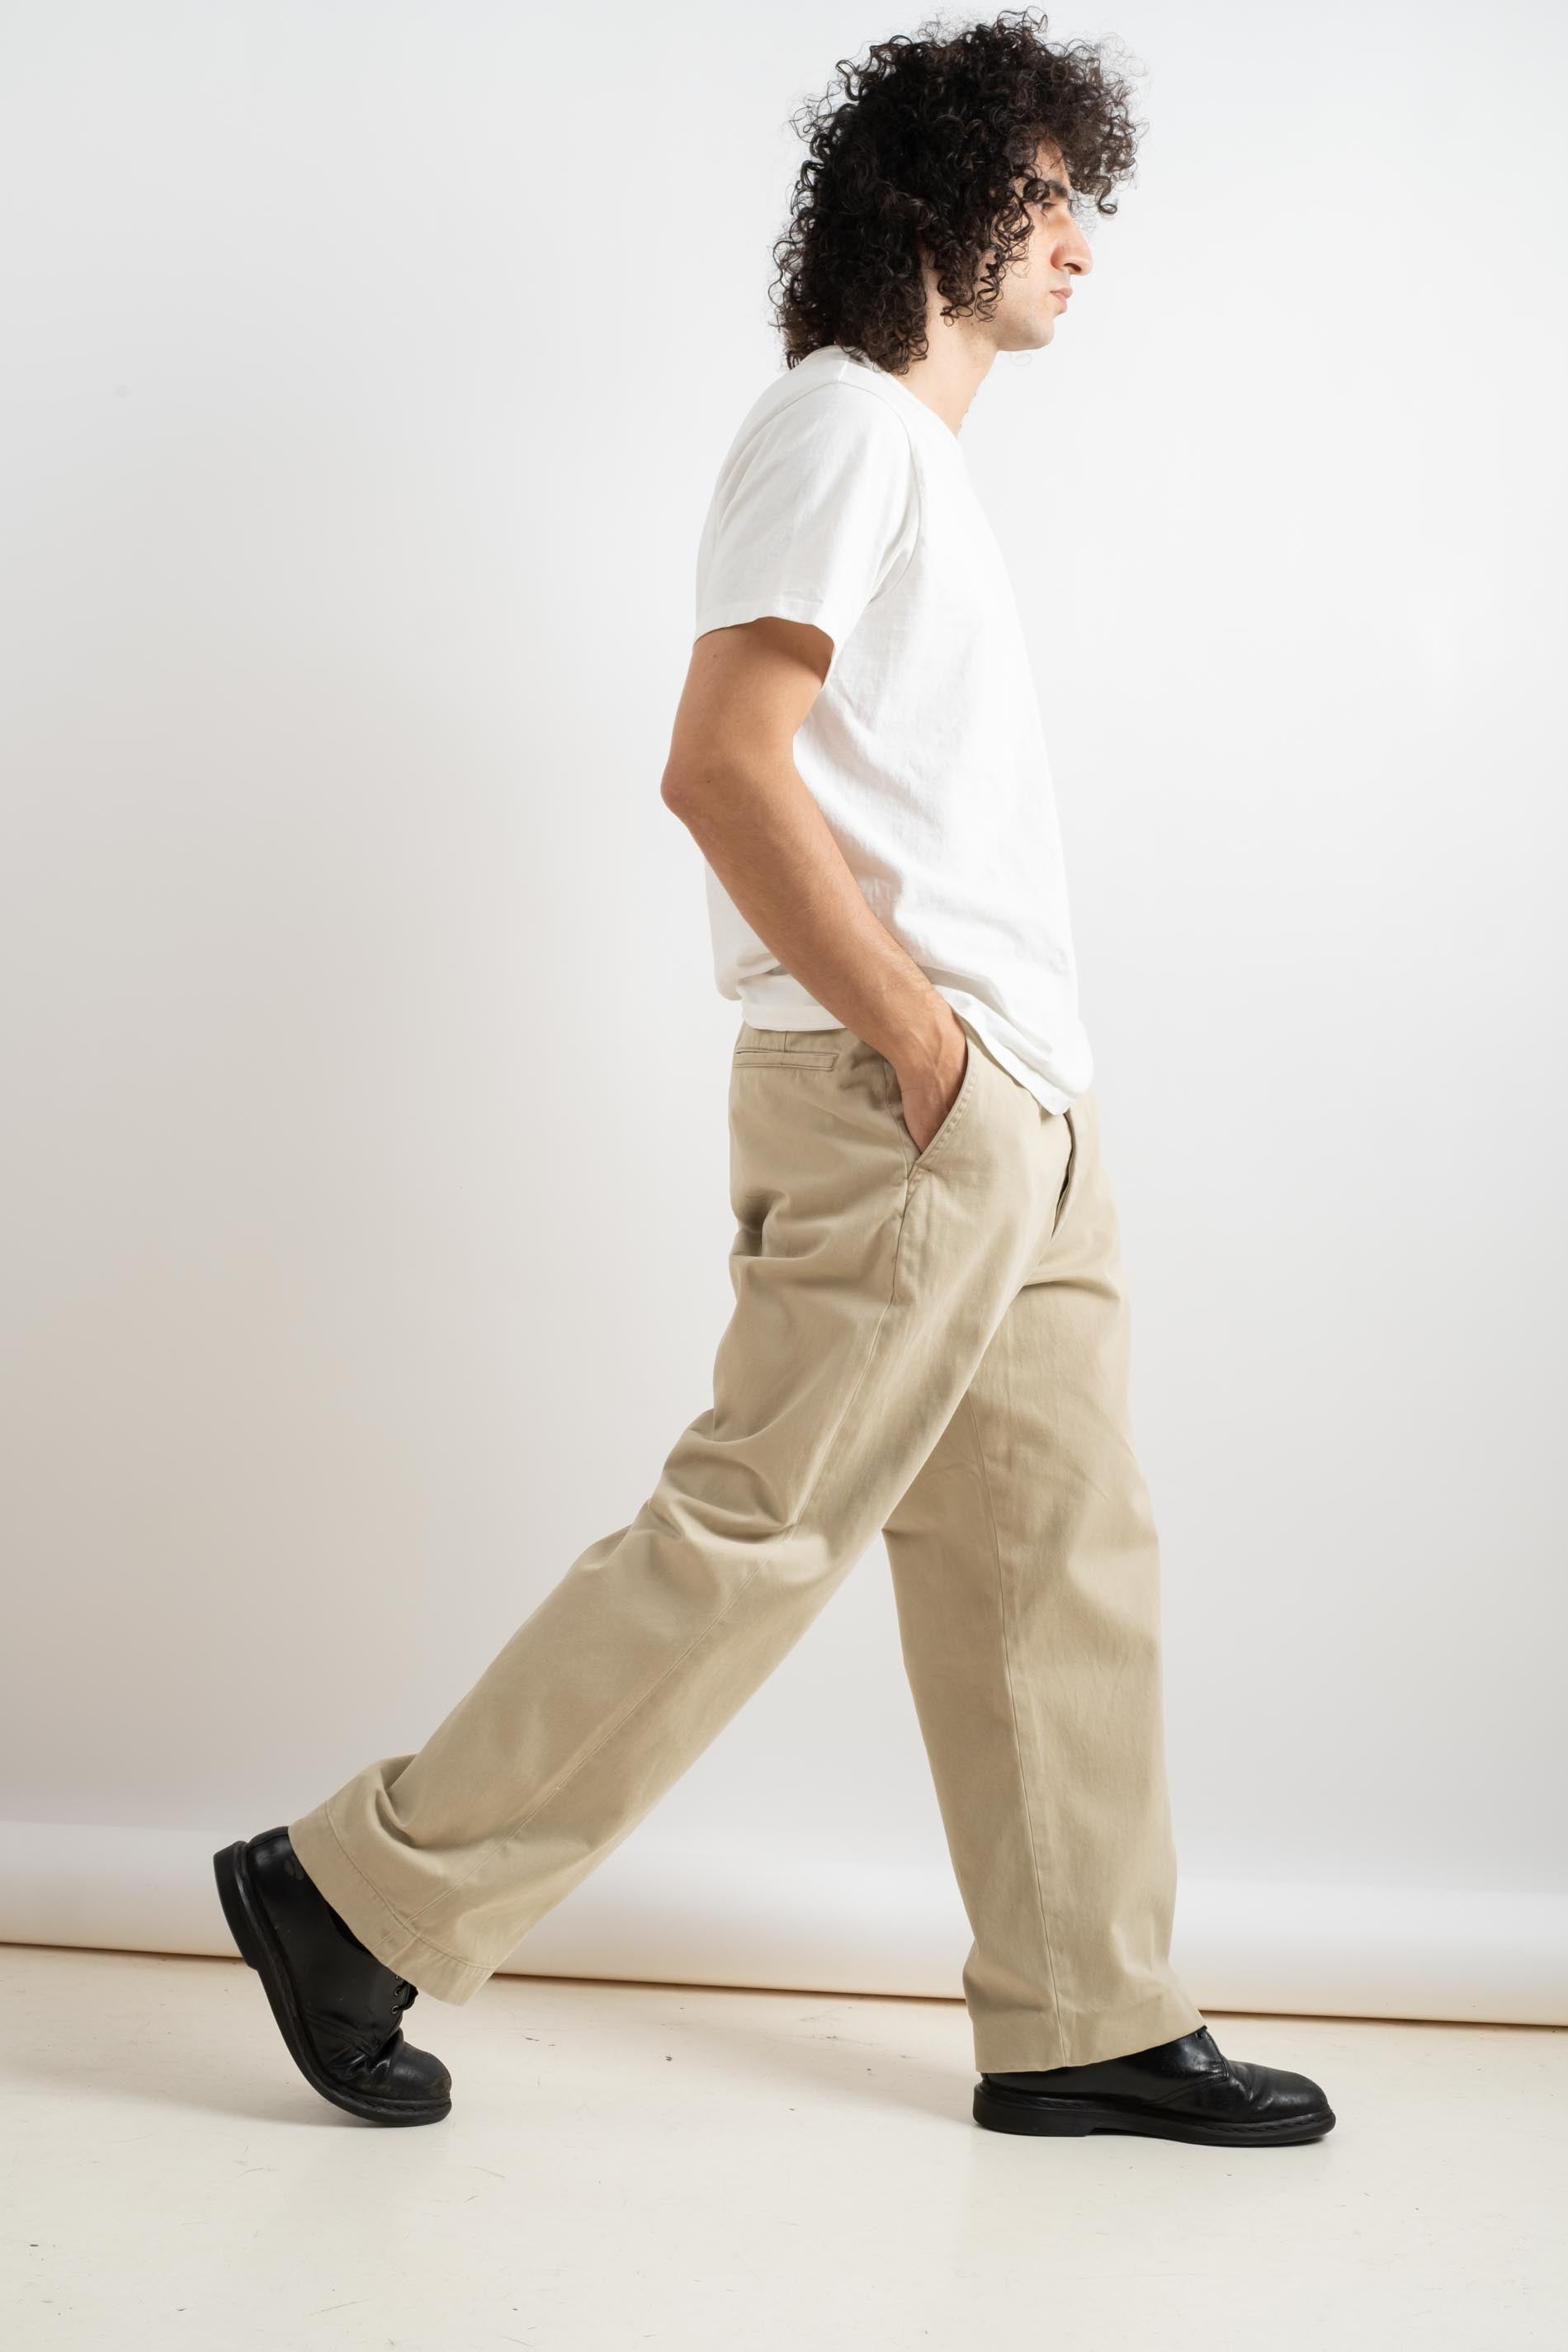 orSlow | VINTAGE FIT ARMY TROUSER IN KHAKI STONE – RELIQUARY